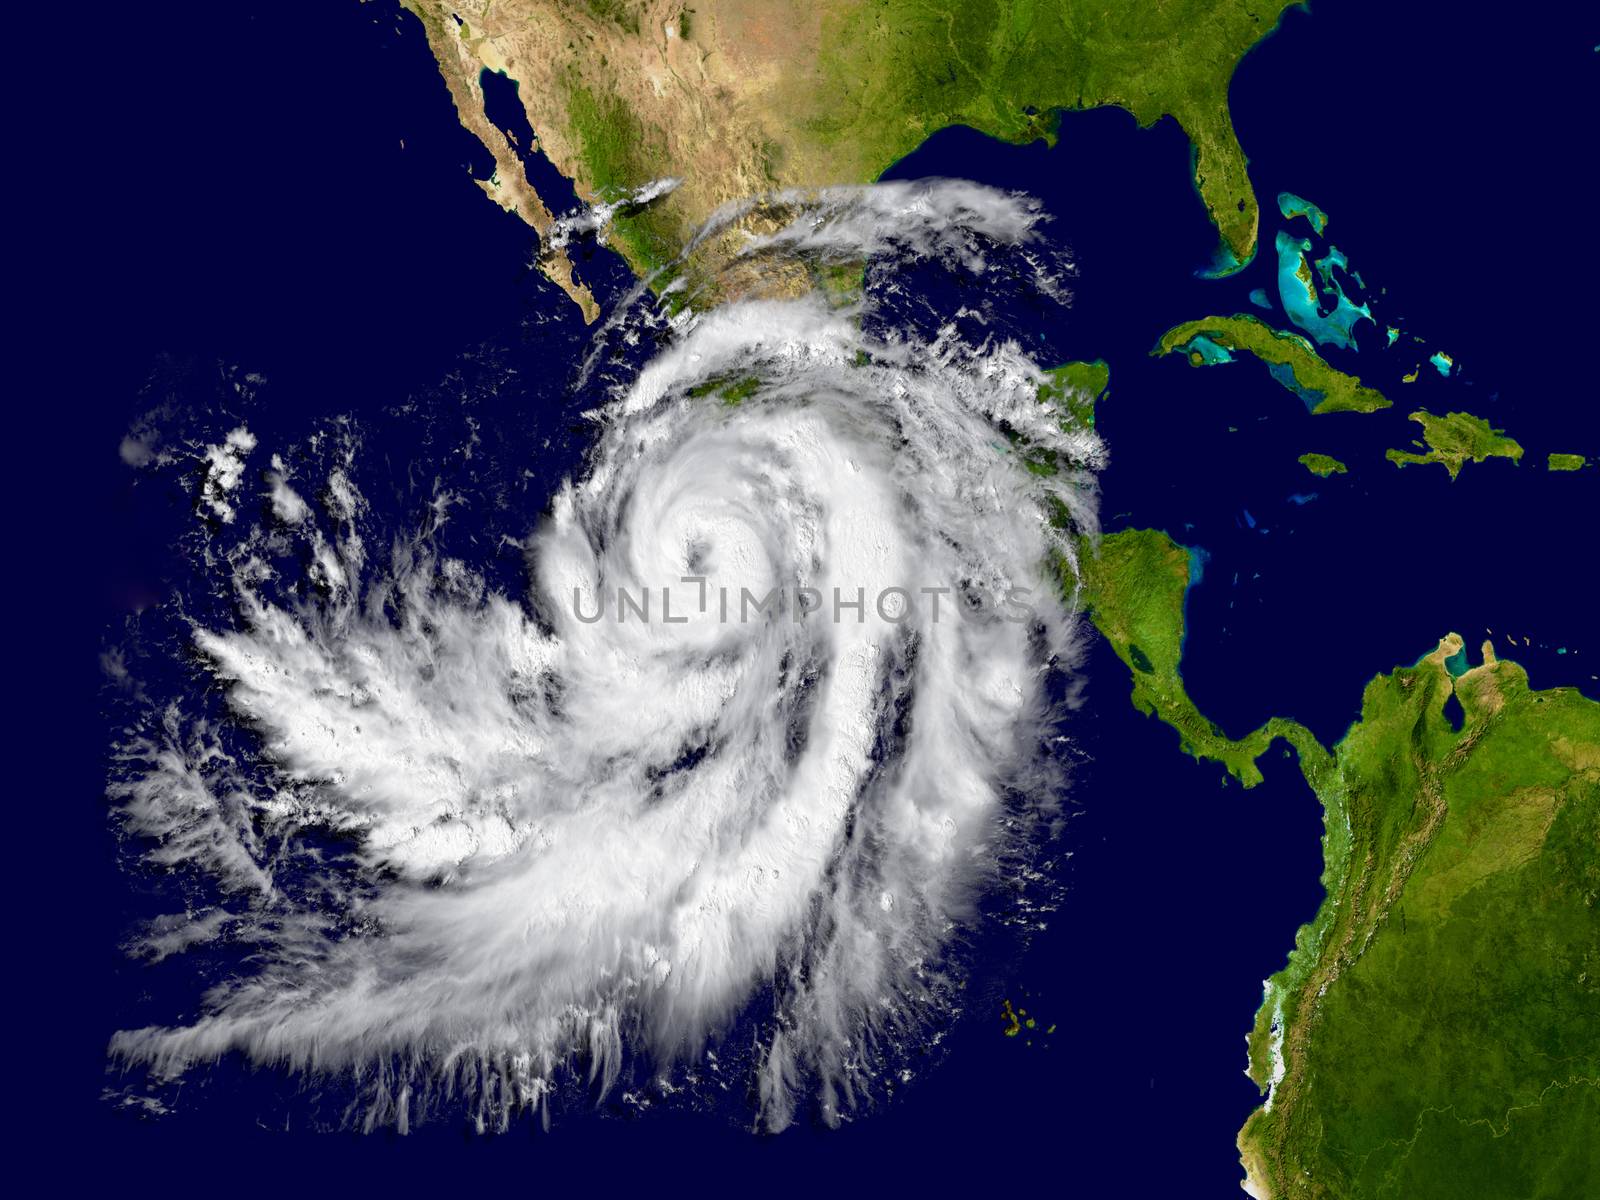 Illustration of hurricane Patricia over the Pacific approaching Mexico. Elements of this image furnished by NASA